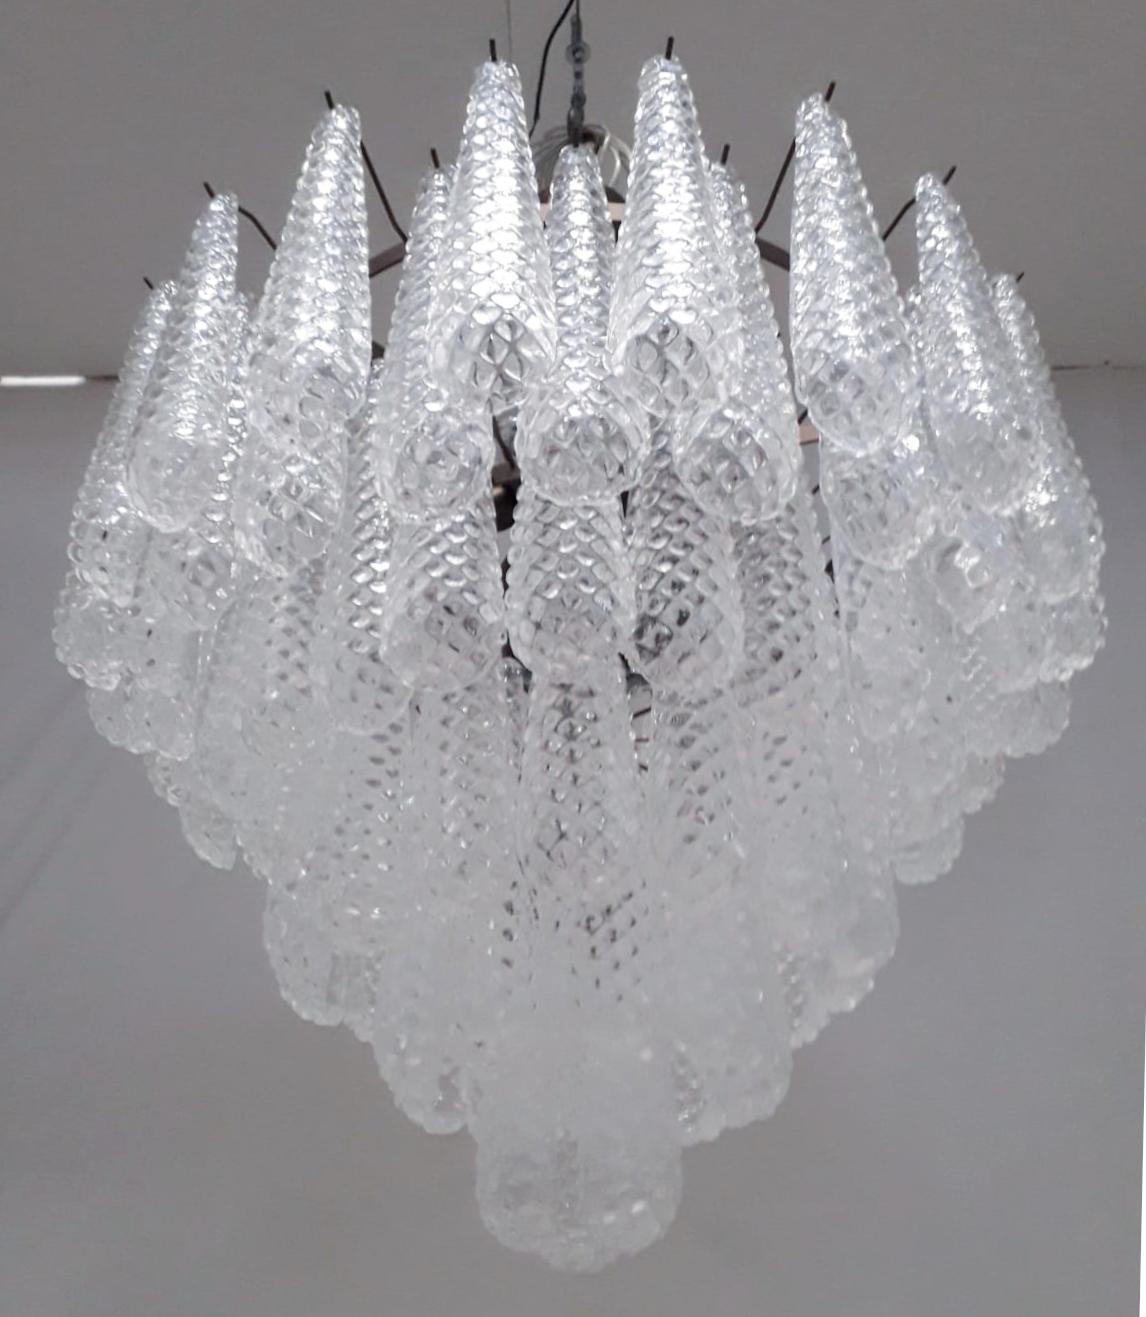 Italian chandelier shown with hand blown Murano etched tears glass drops, mounted on bronzed metal finish frame by Fabio Ltd / Made in Italy
10 lights / 9 in E26 or E27 type, max 60W each and 1 in E12 or E14 type, max 40W
Measures: Diameter 31.5